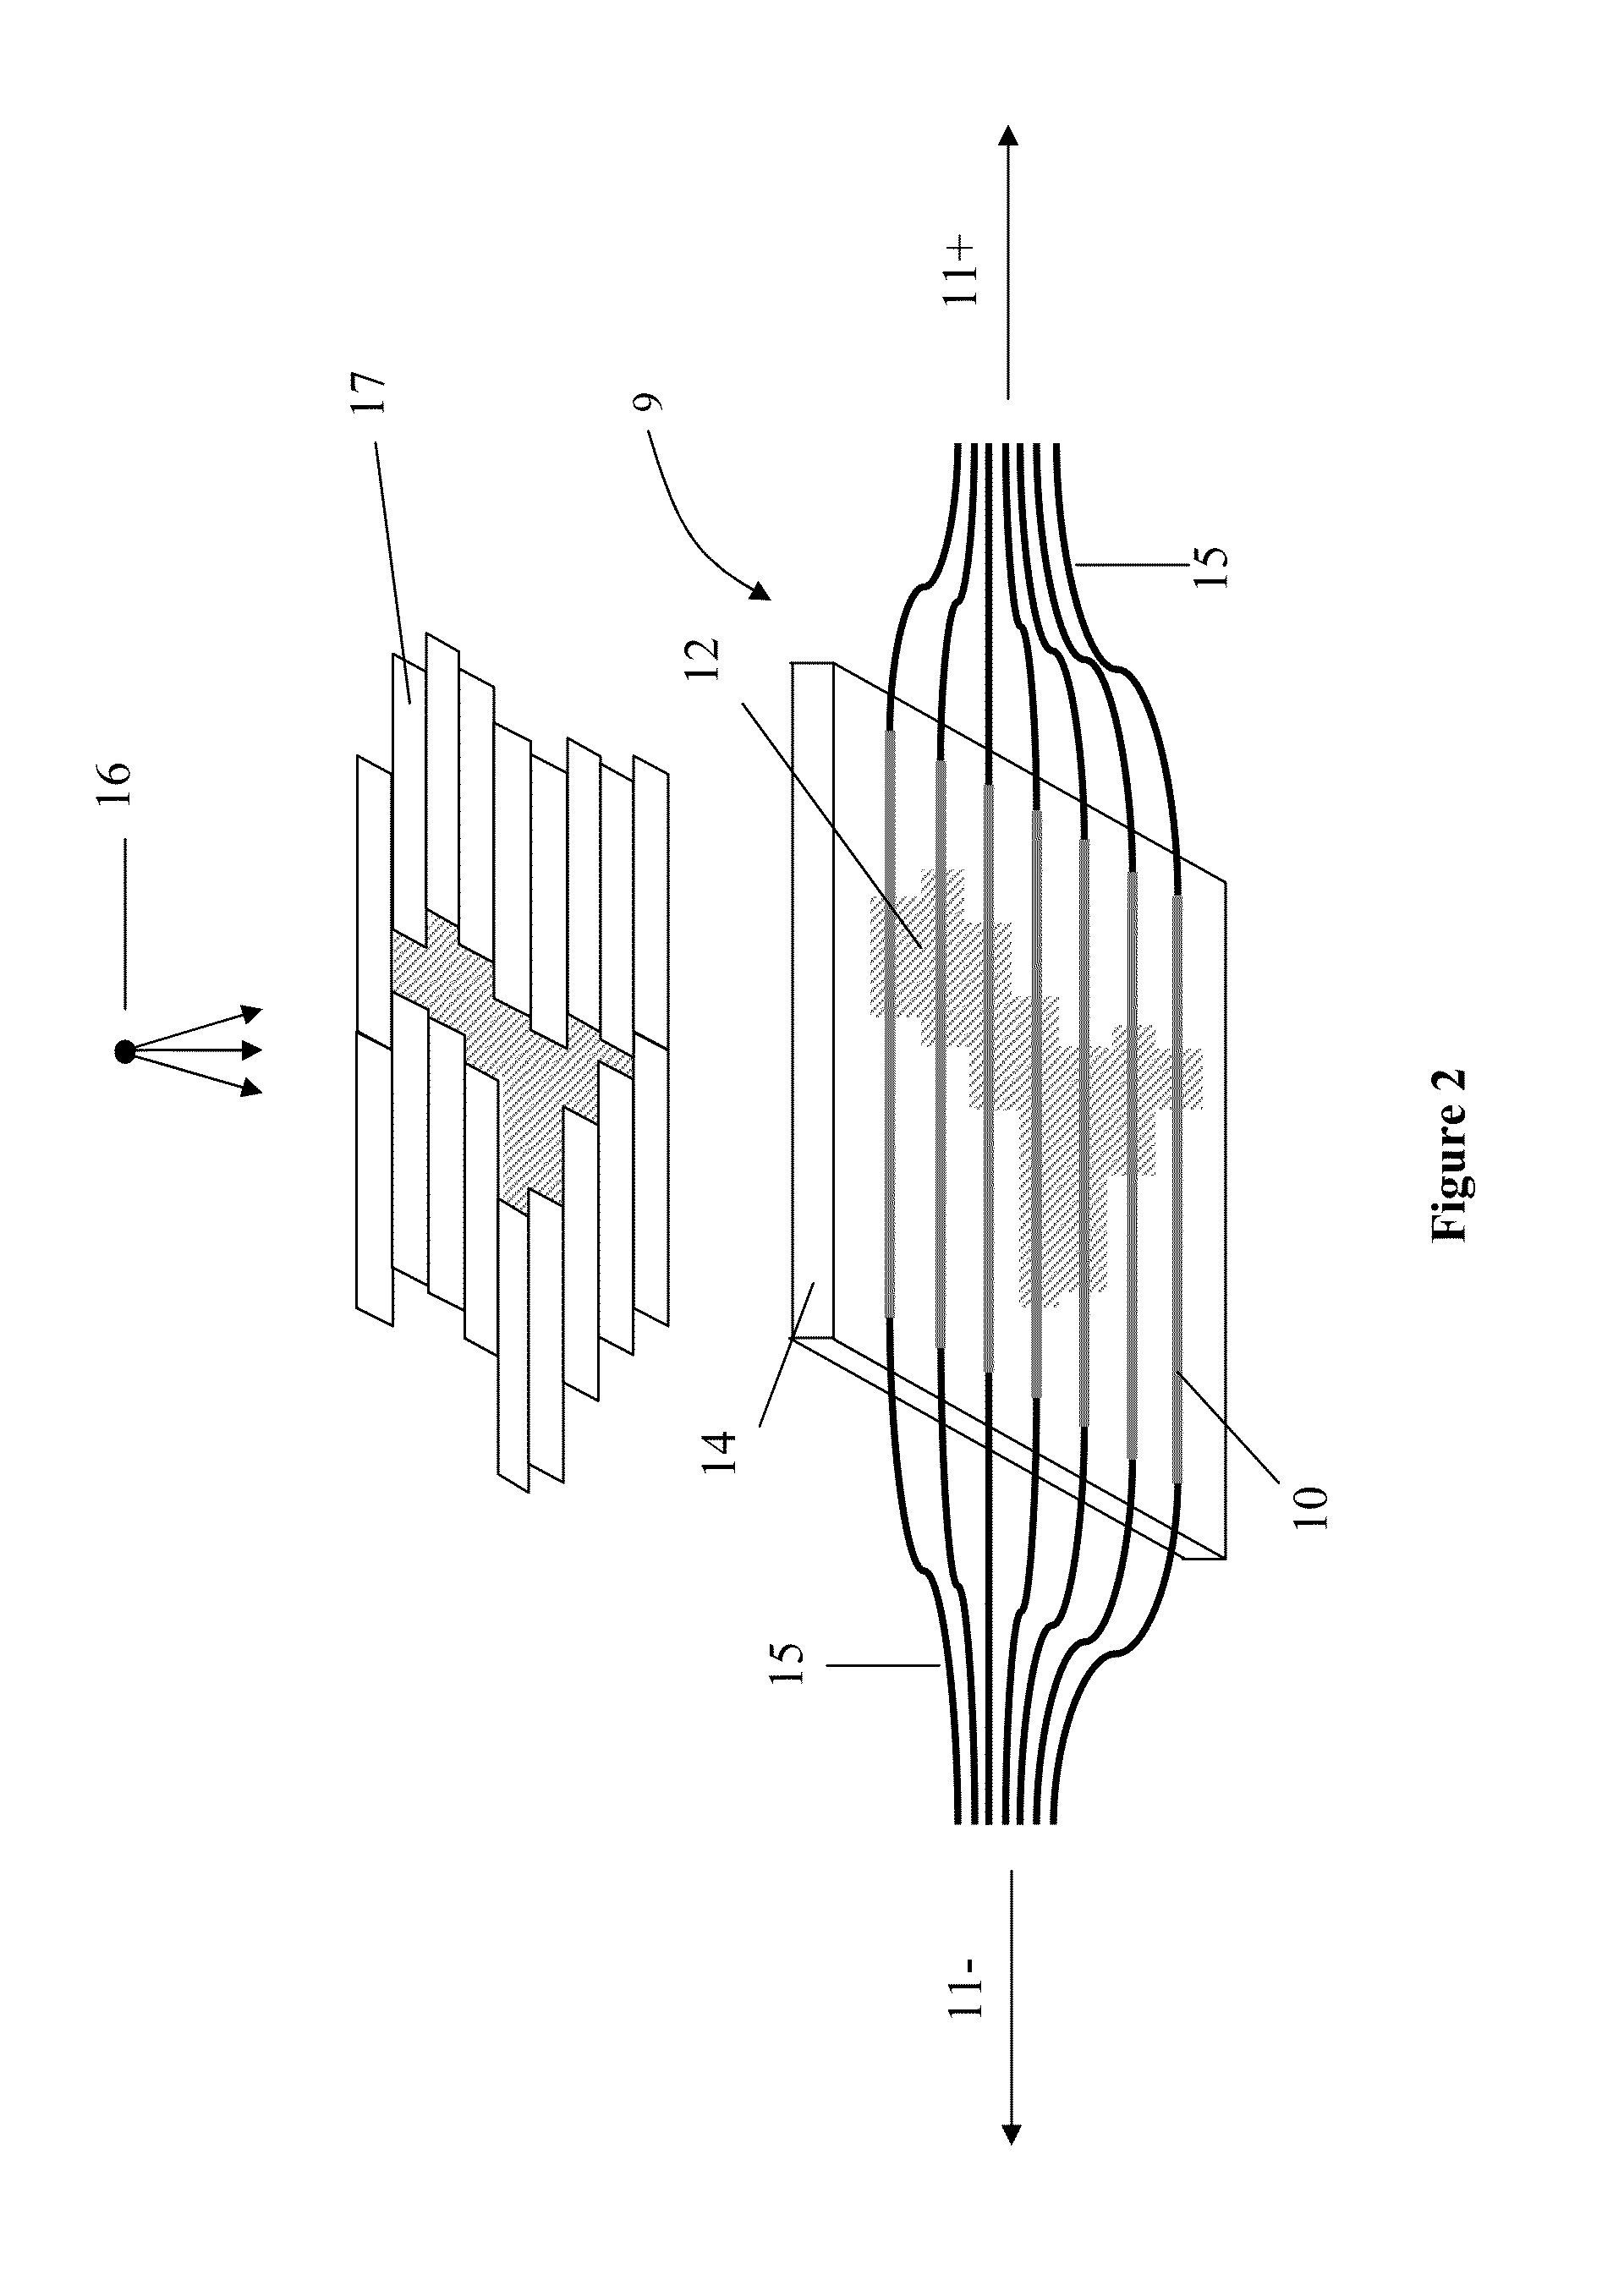 Fluence monitoring devices with scintillating fibers for X-ray radiotherapy treatment and methods for calibration and validation of same